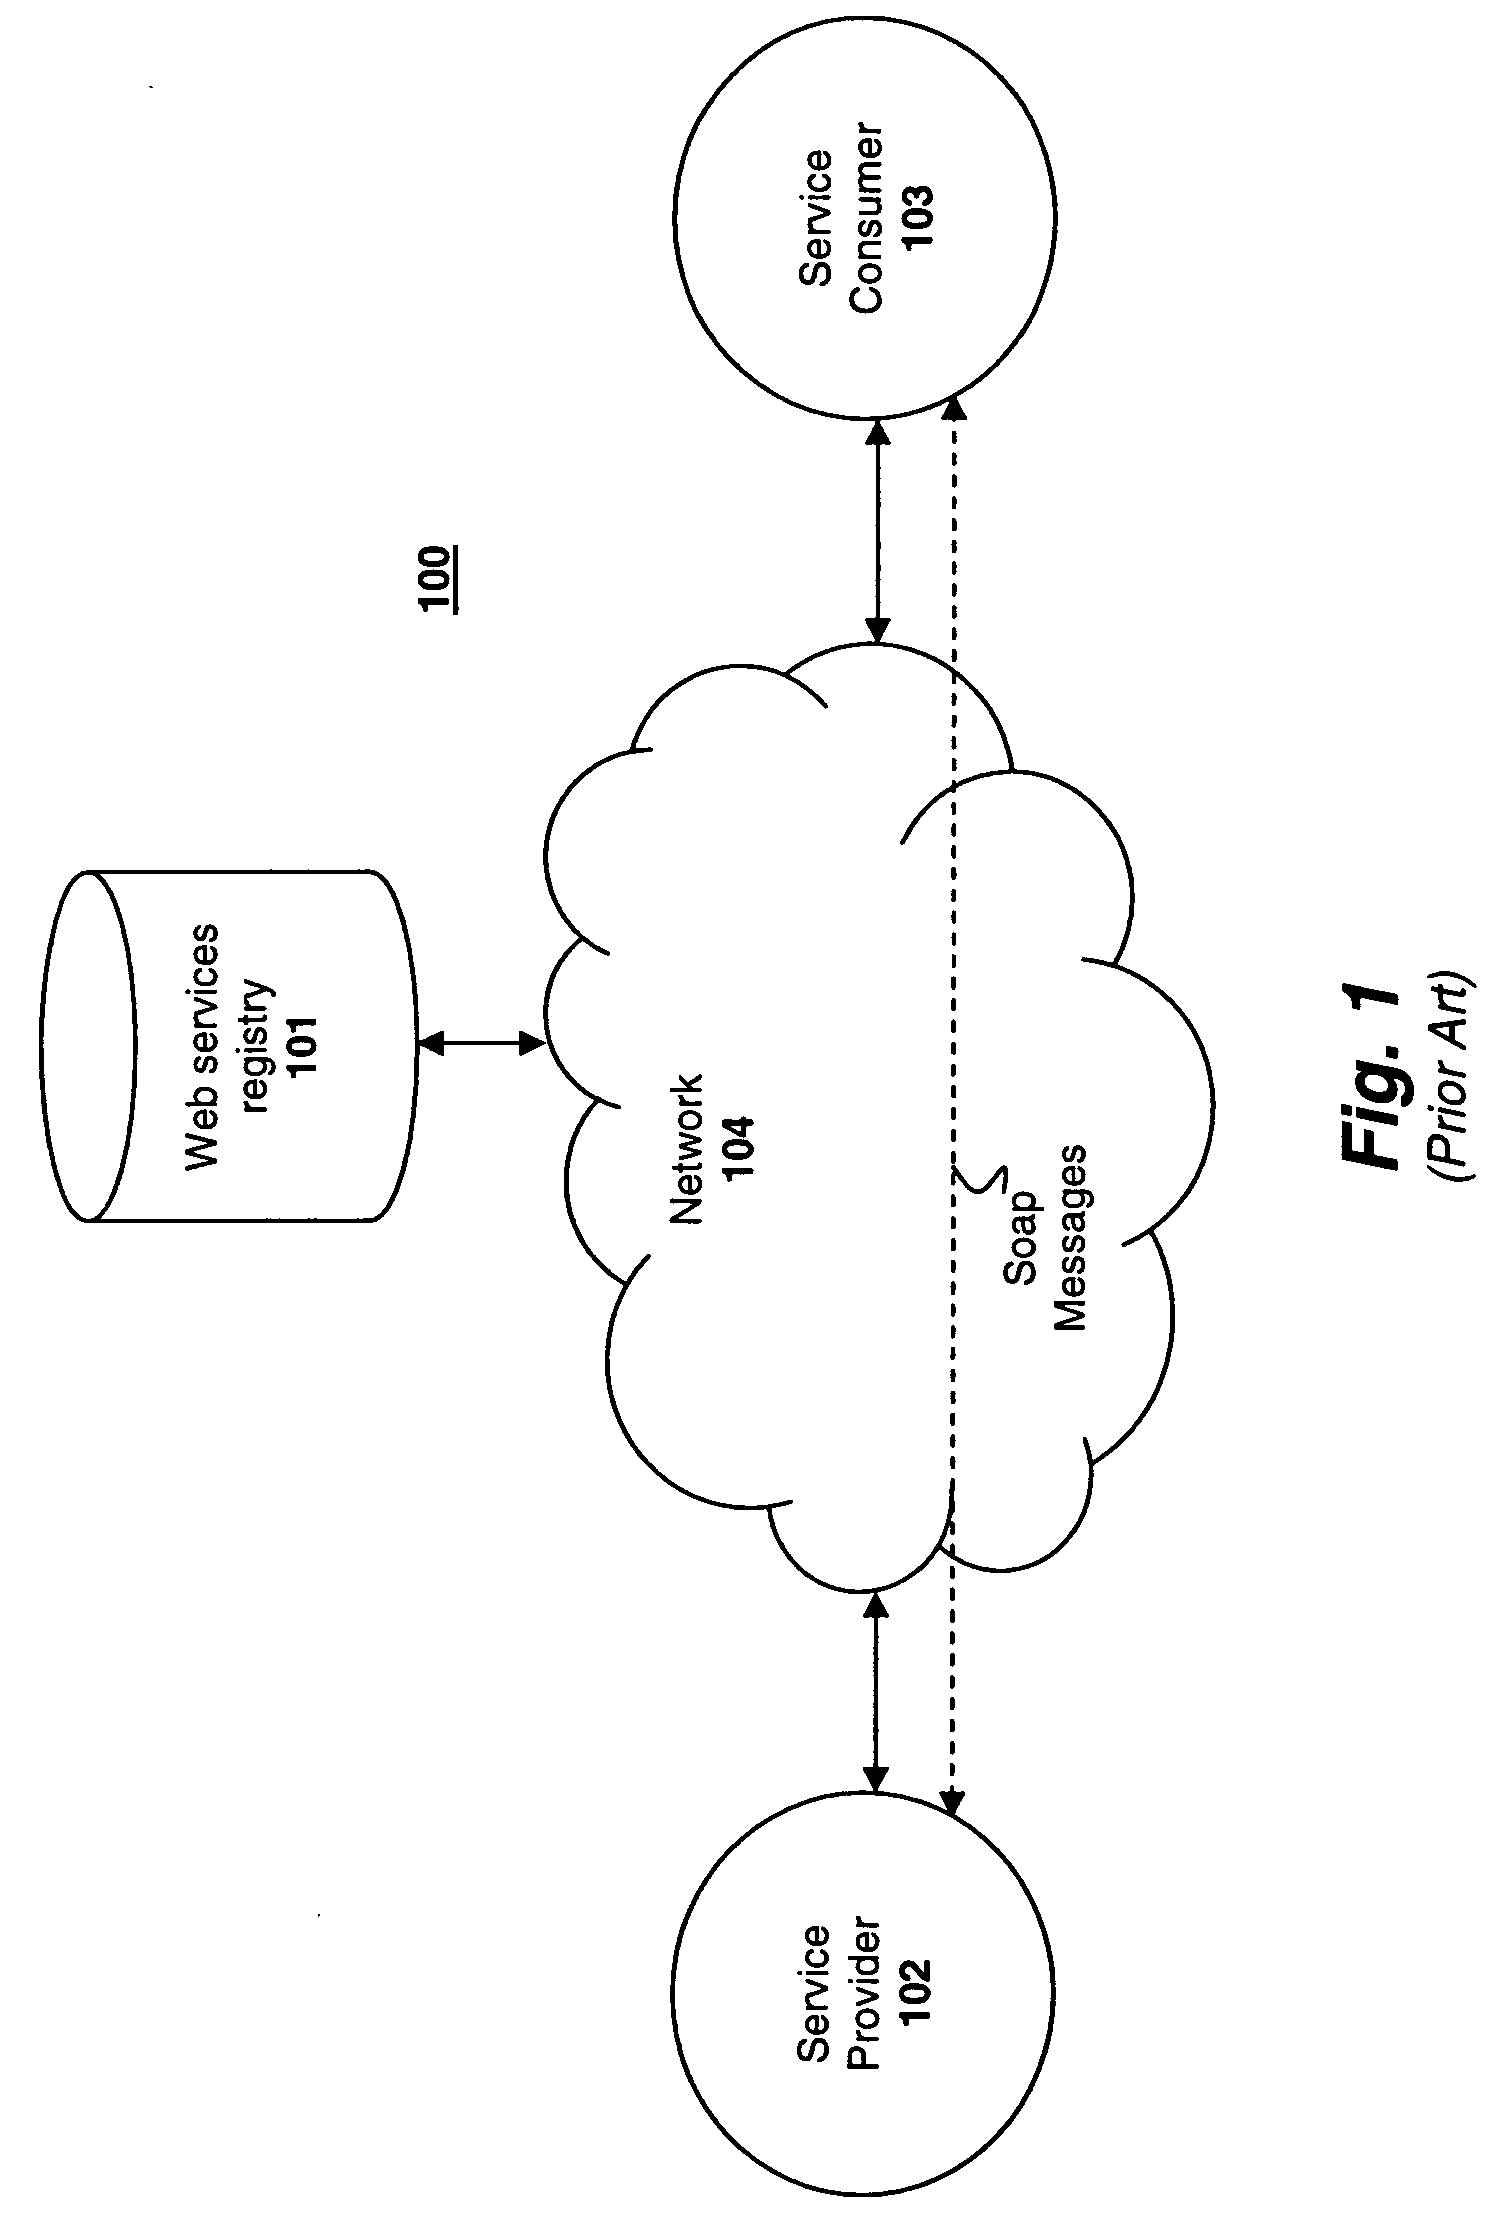 System and method for automated configuration and deployment of applications